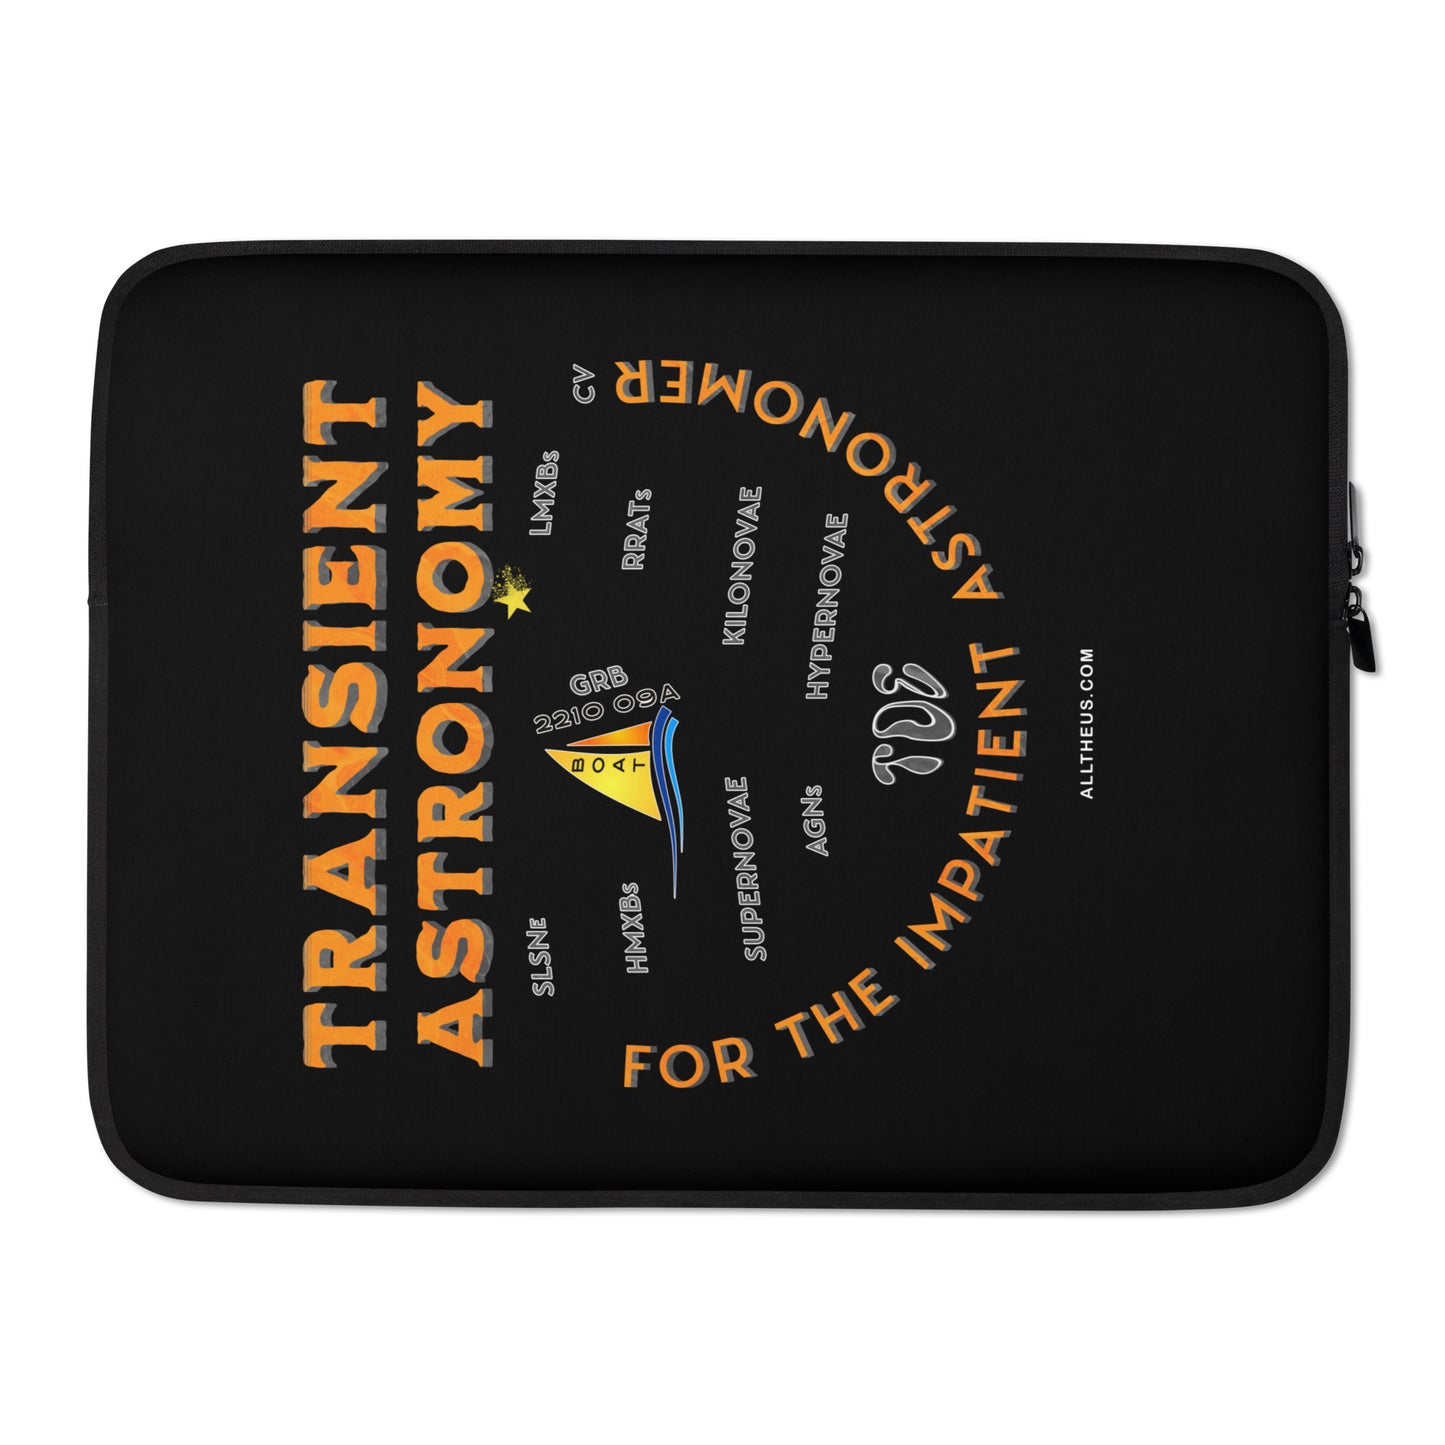 Laptop Sleeve - Transient Astronomy, For The Impatient Astronomer